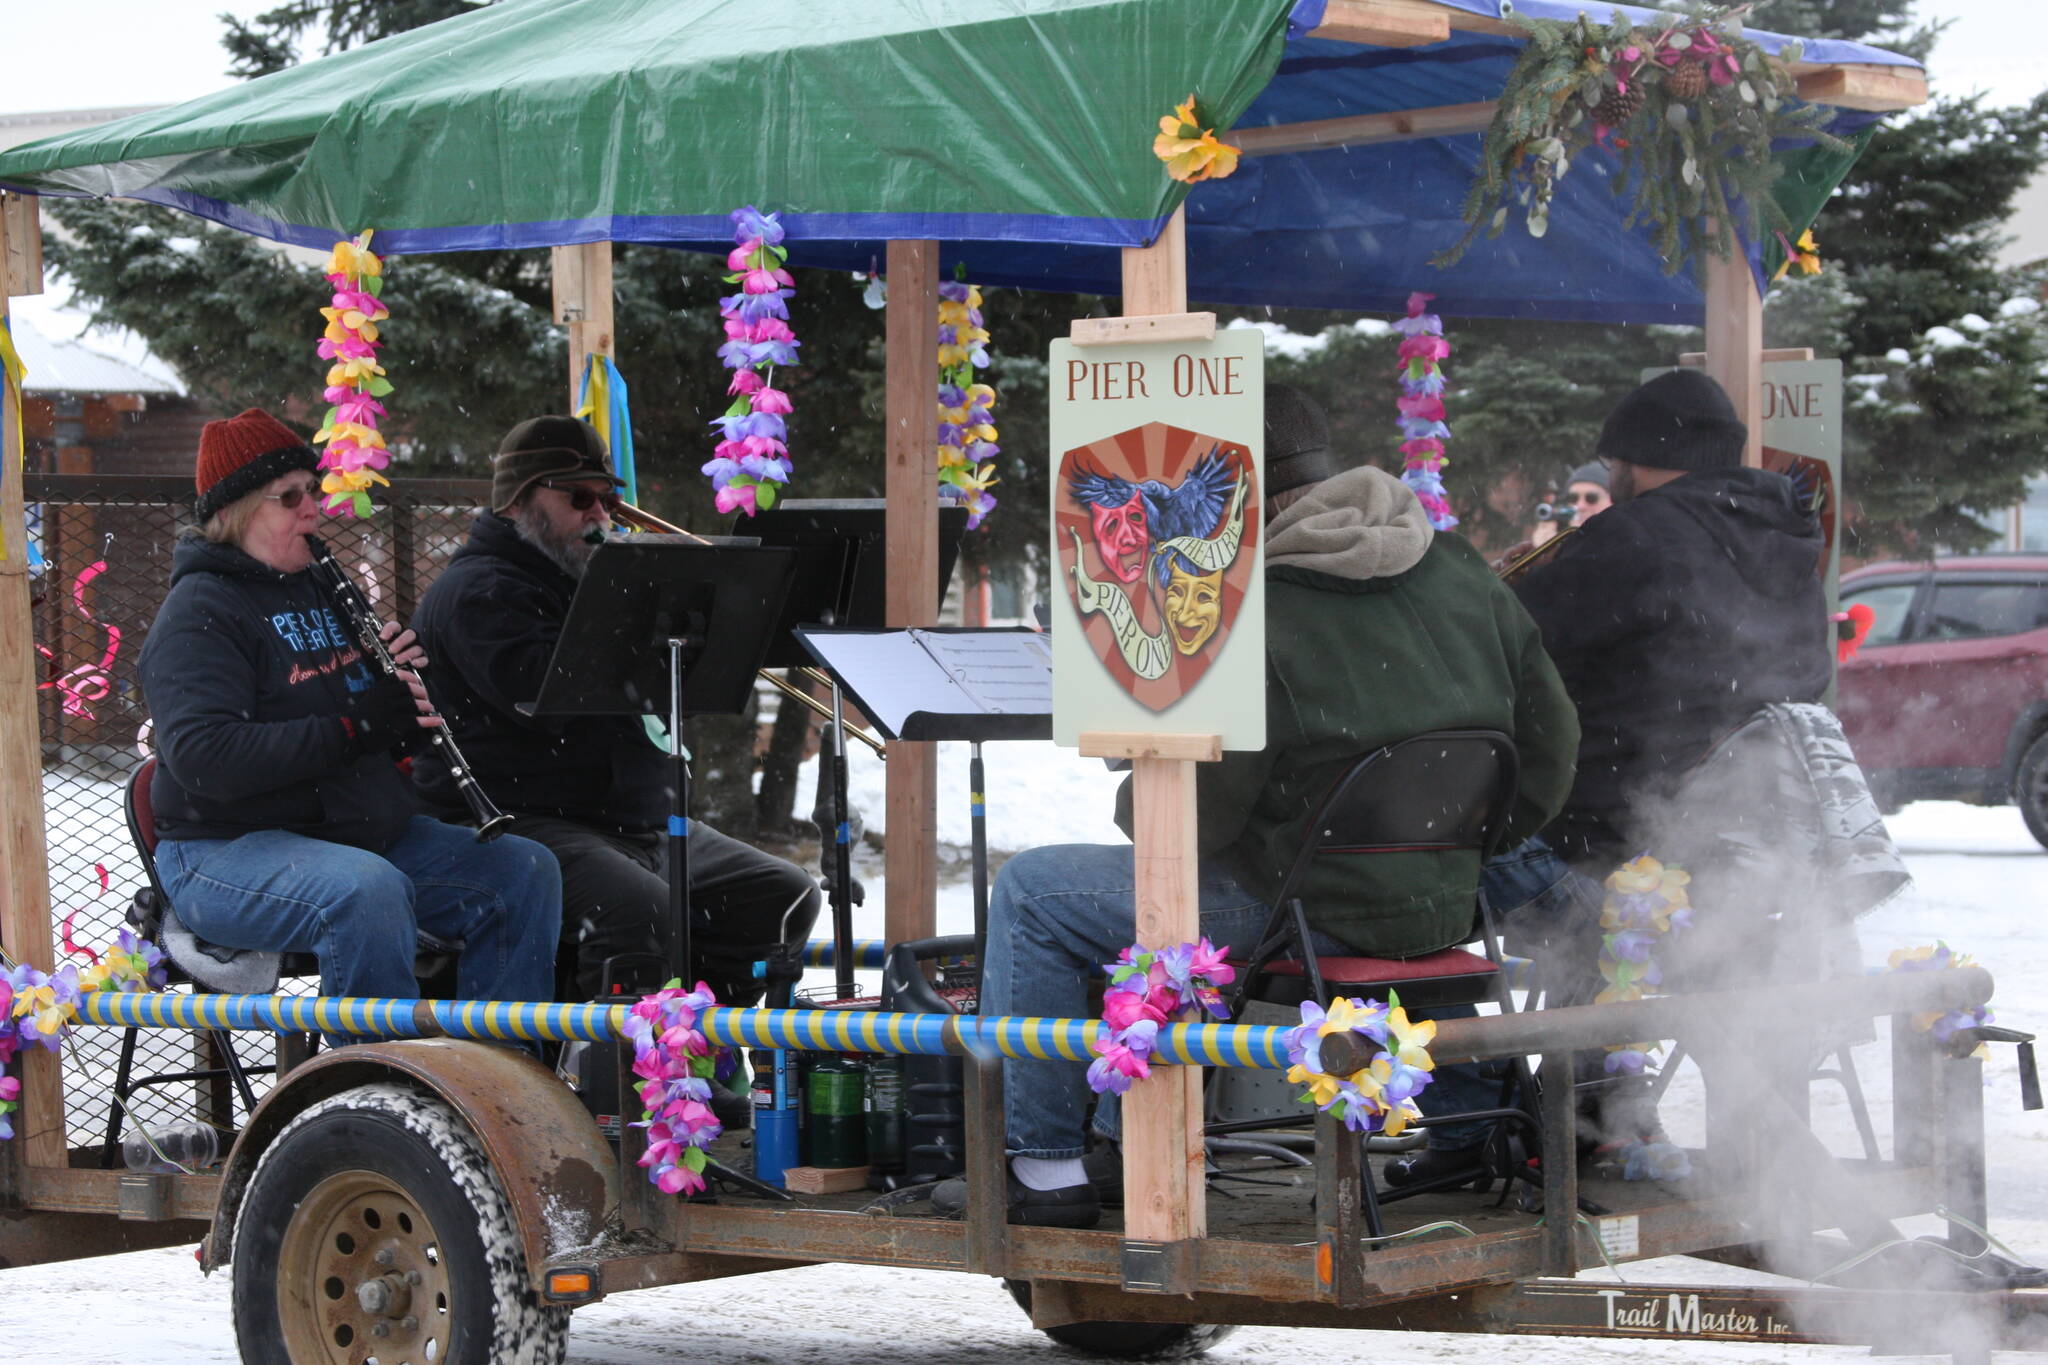 A quartet provides musical accompaniment on the Pier One Theatre float in the 69th Annual Winter Carnival Parade on Saturday, Feb. 11, 2023 in Homer, Alaska. Photo by Delcenia Cosman